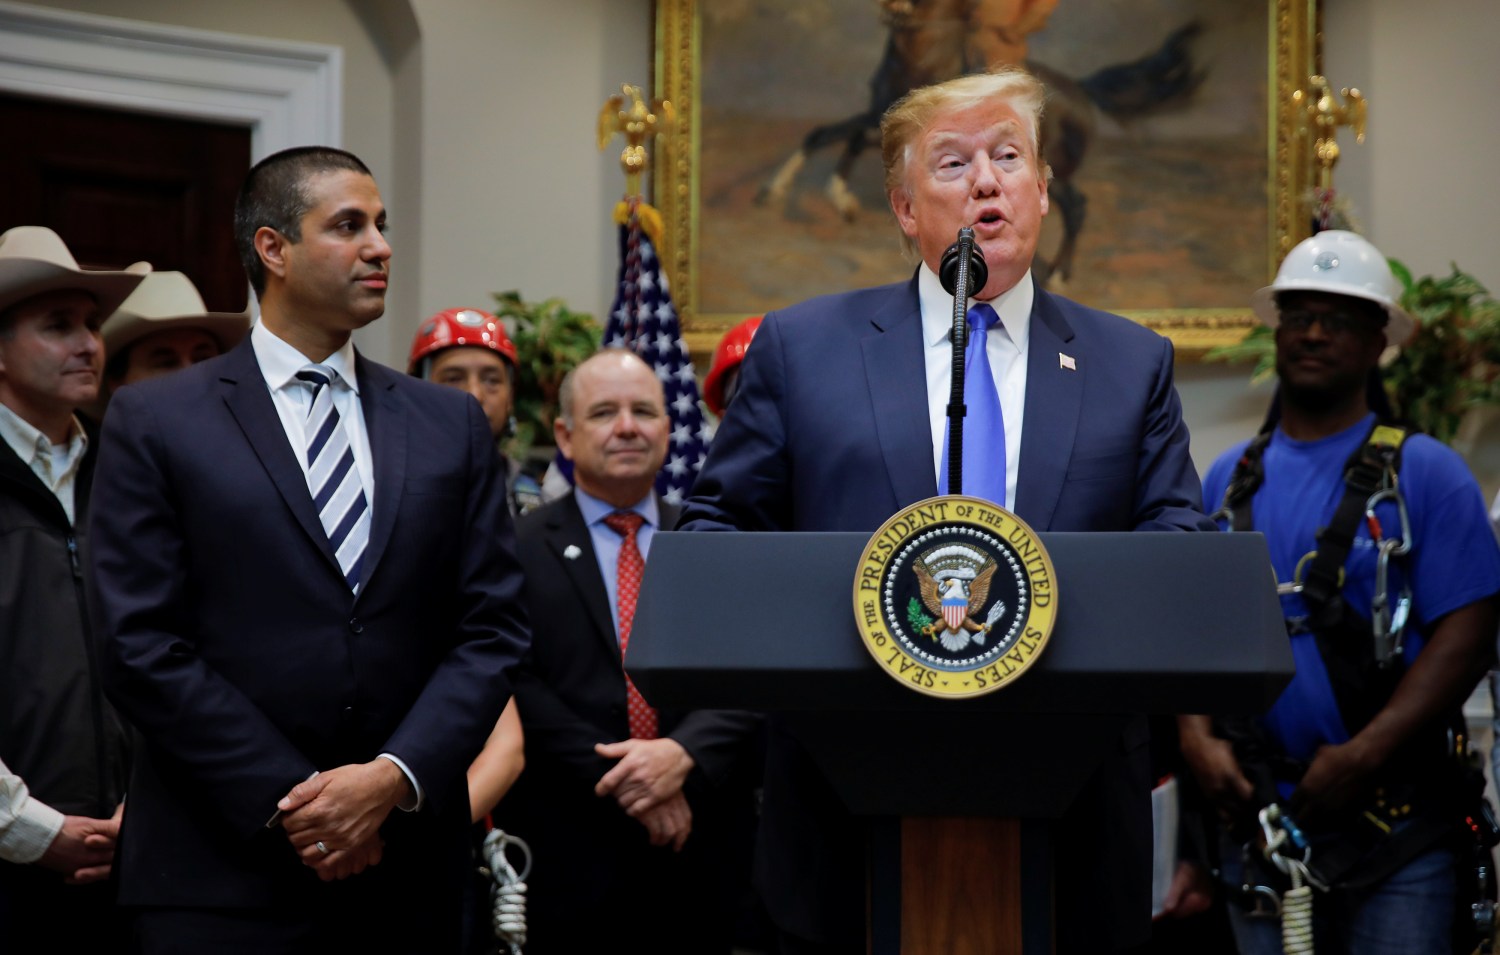 U.S. President Donald Trump speaks next to Federal Communications Commission (FCC) Commissioner Ajit Pai during an event on United States 5G deployment in the Roosevelt Room of the White House in Washington, U.S., April 12, 2019. REUTERS/Carlos Barria - RC19EF413F60